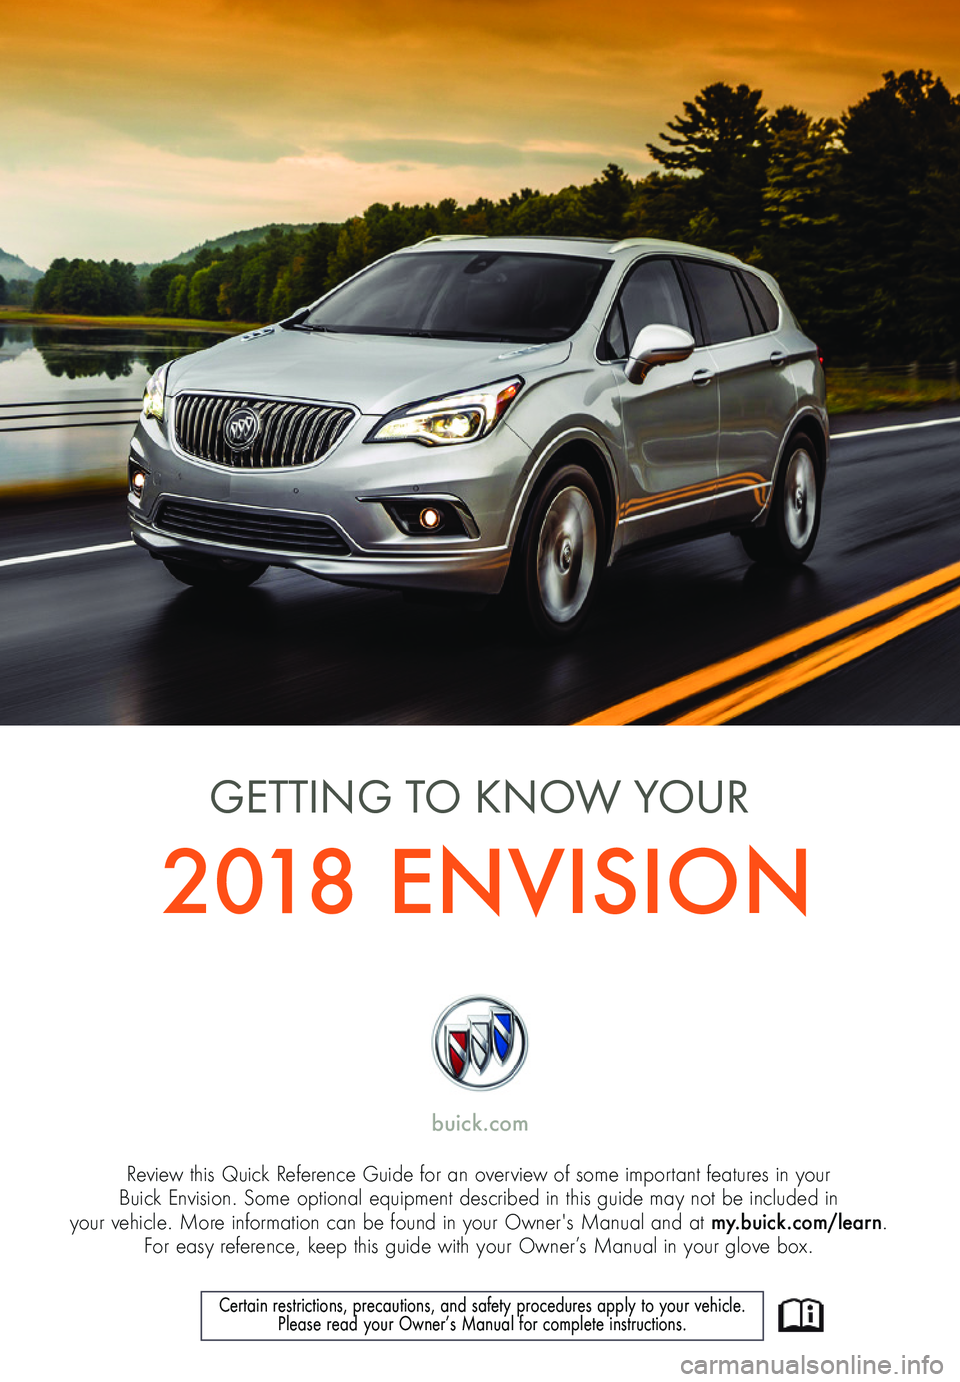 BUICK BENVISION 2018  Get To Know Guide 